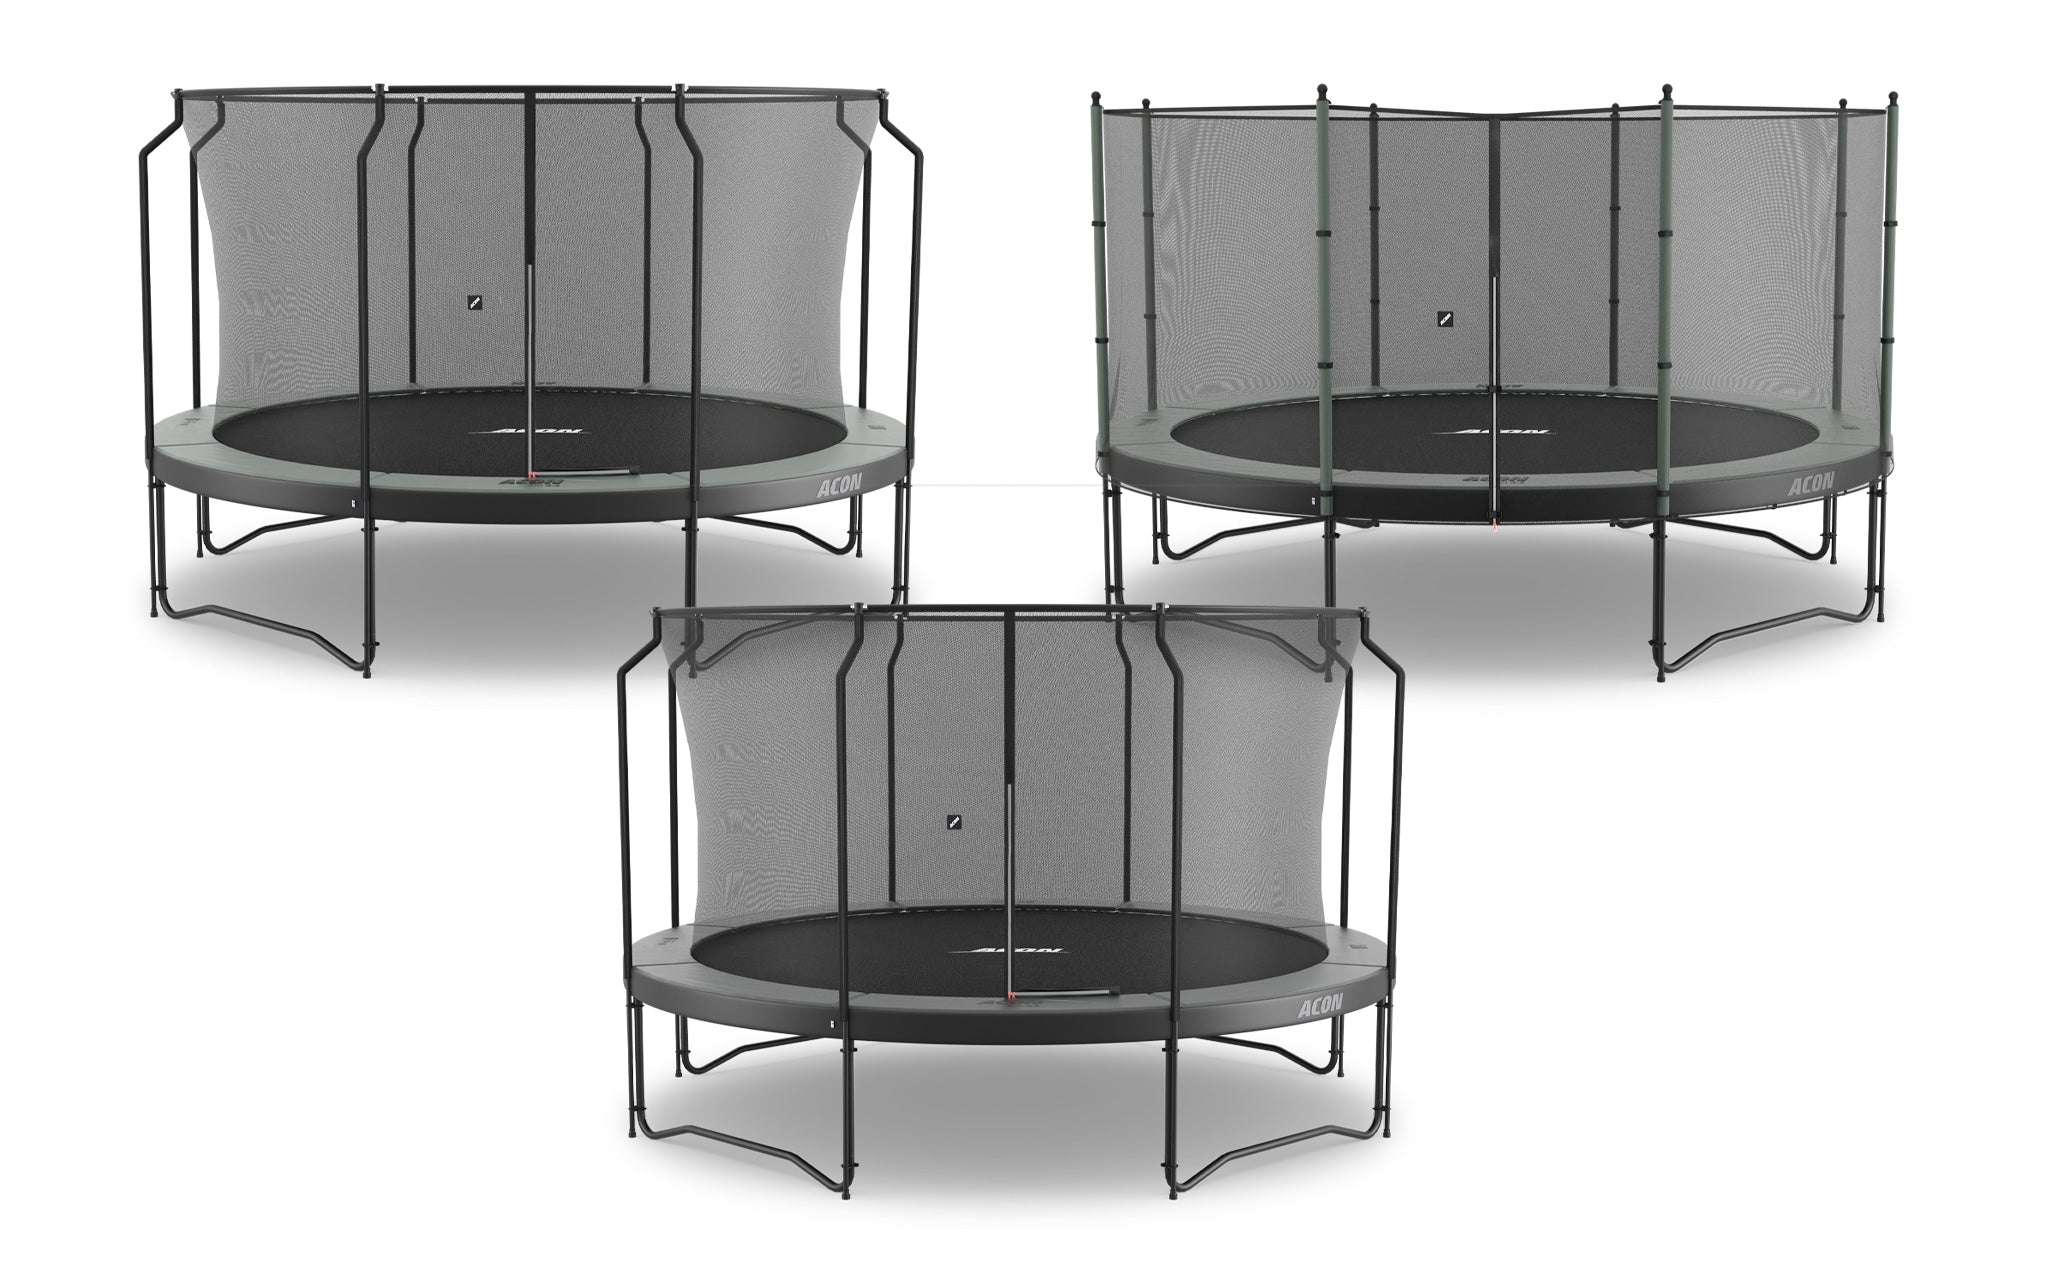 Three 4,3m round trampolines with enclosures on a white background. The trampolines are by ACON